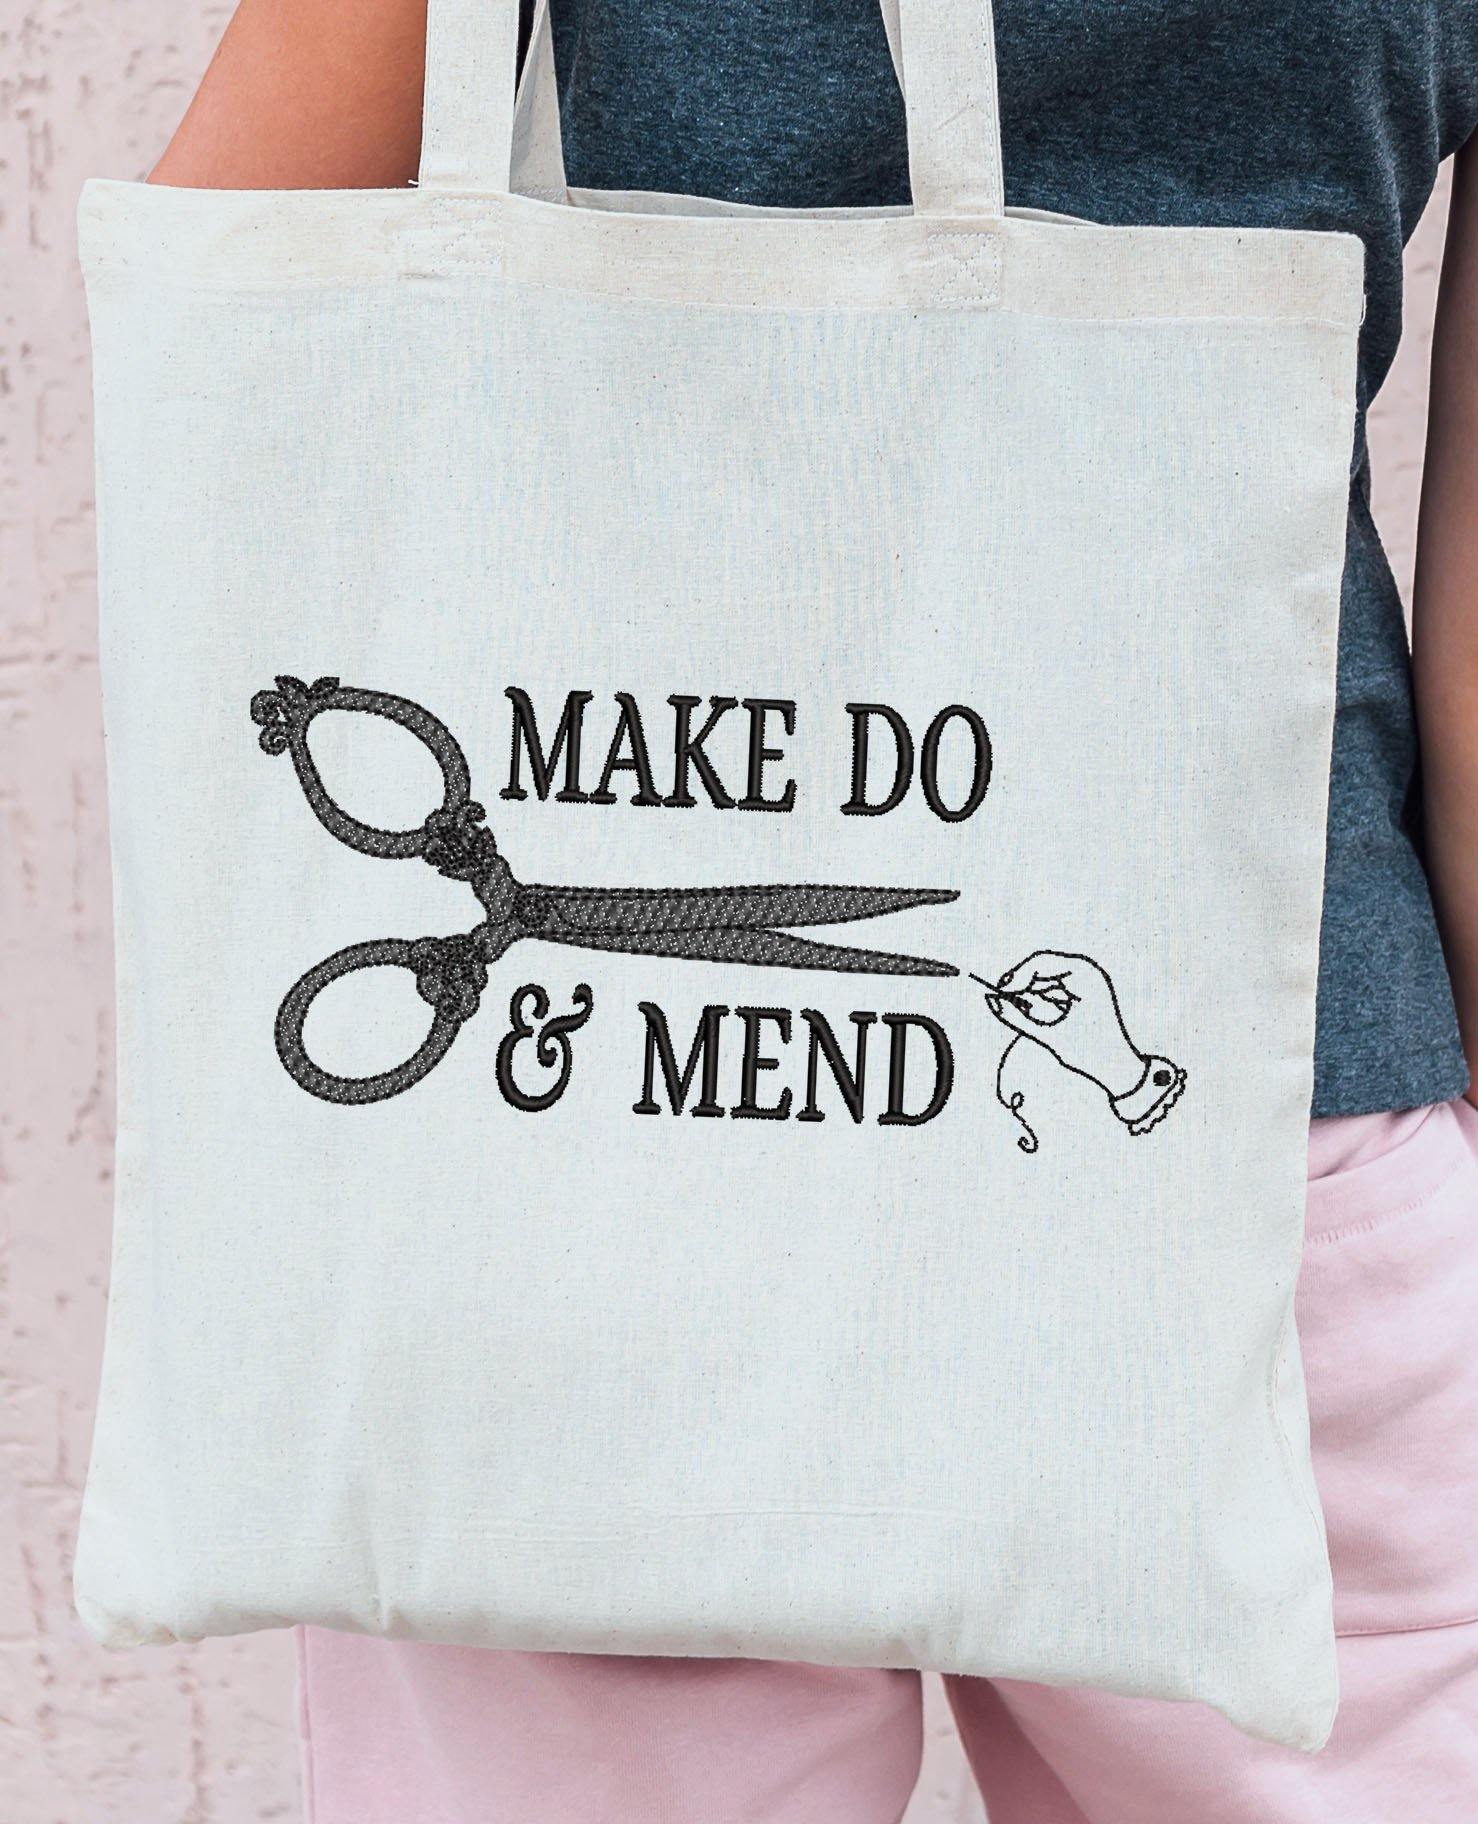 Make Do Mend Embroidery Design - Oh My Crafty Supplies Inc.